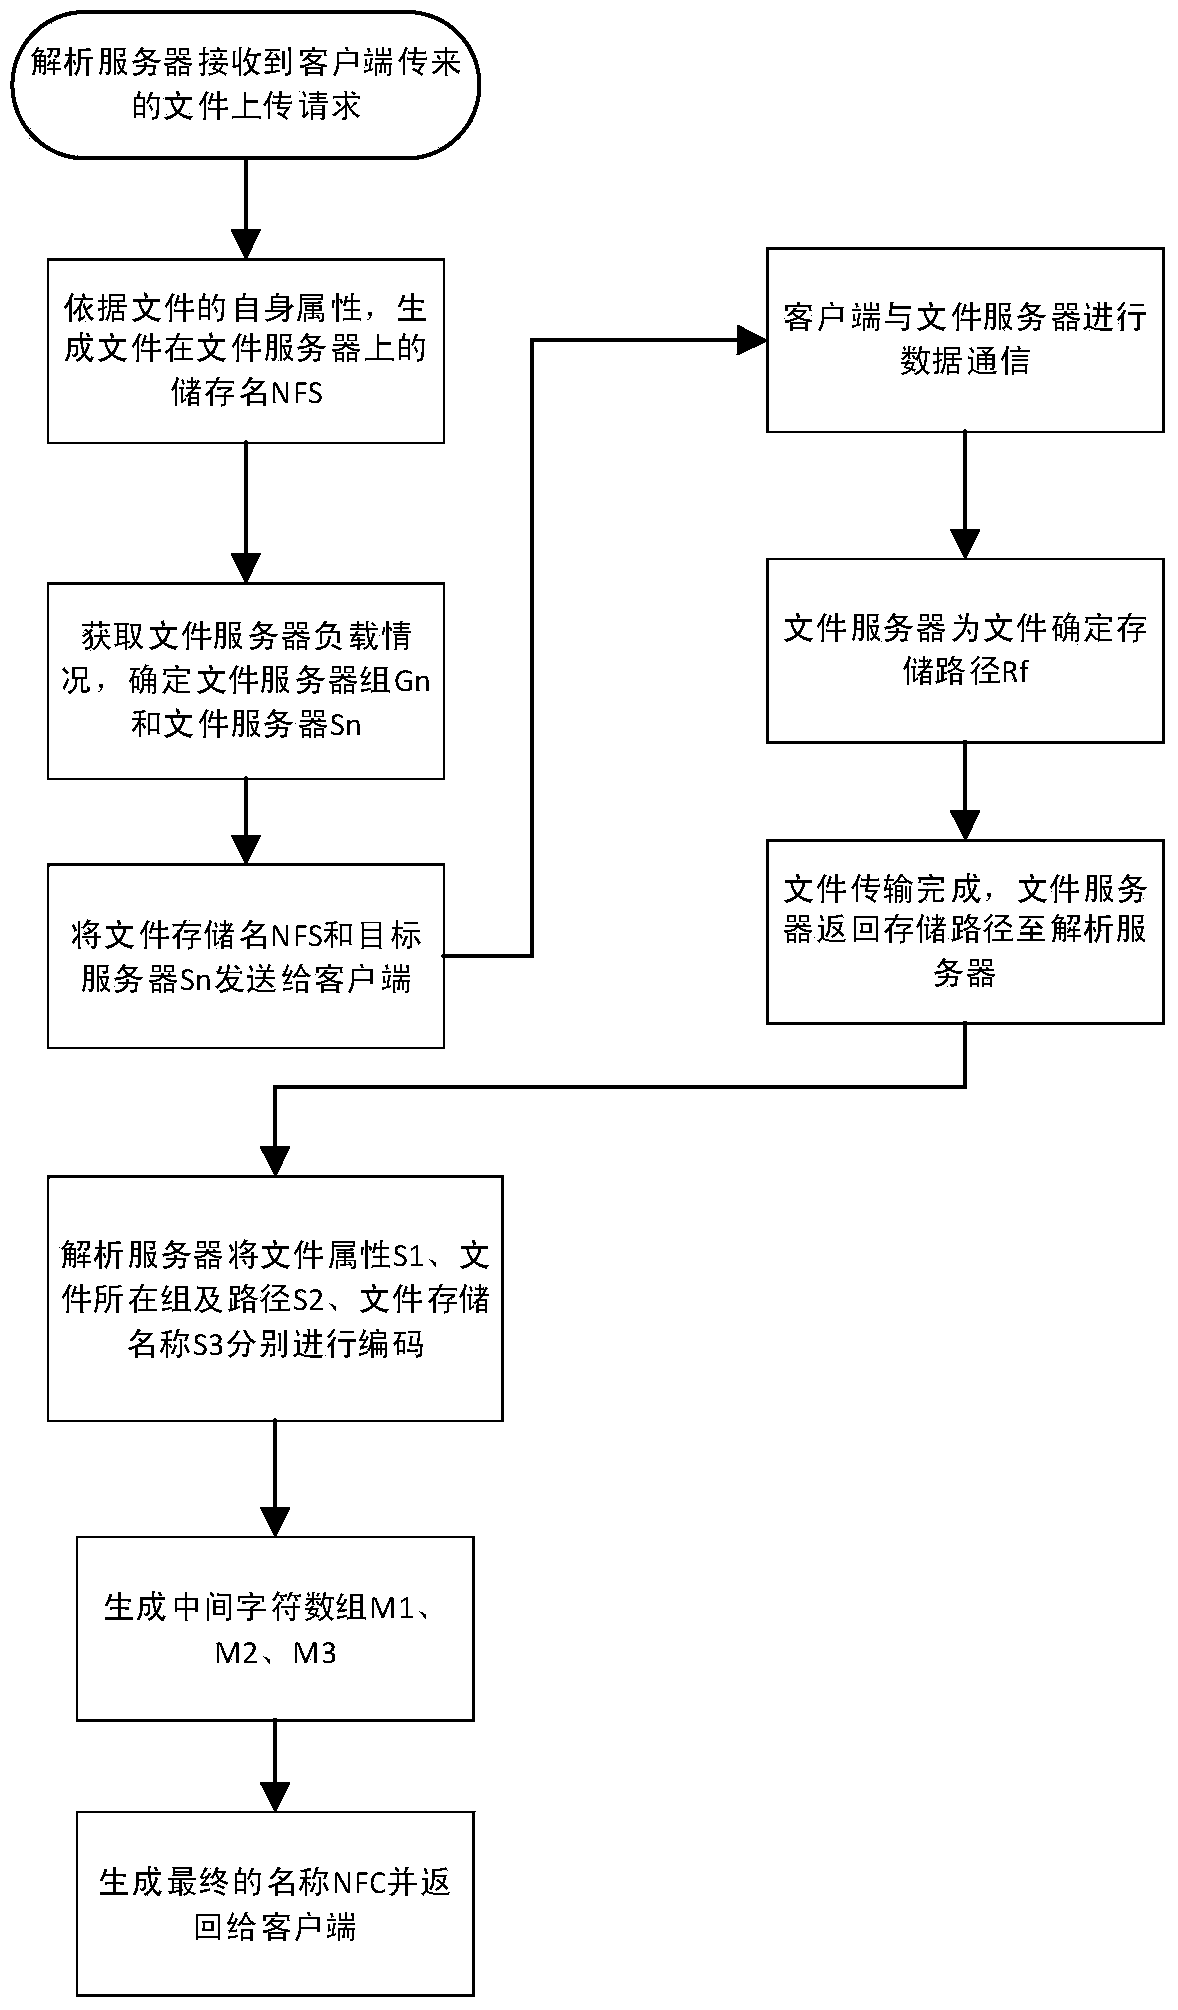 File uploading and searching method of distributed file system